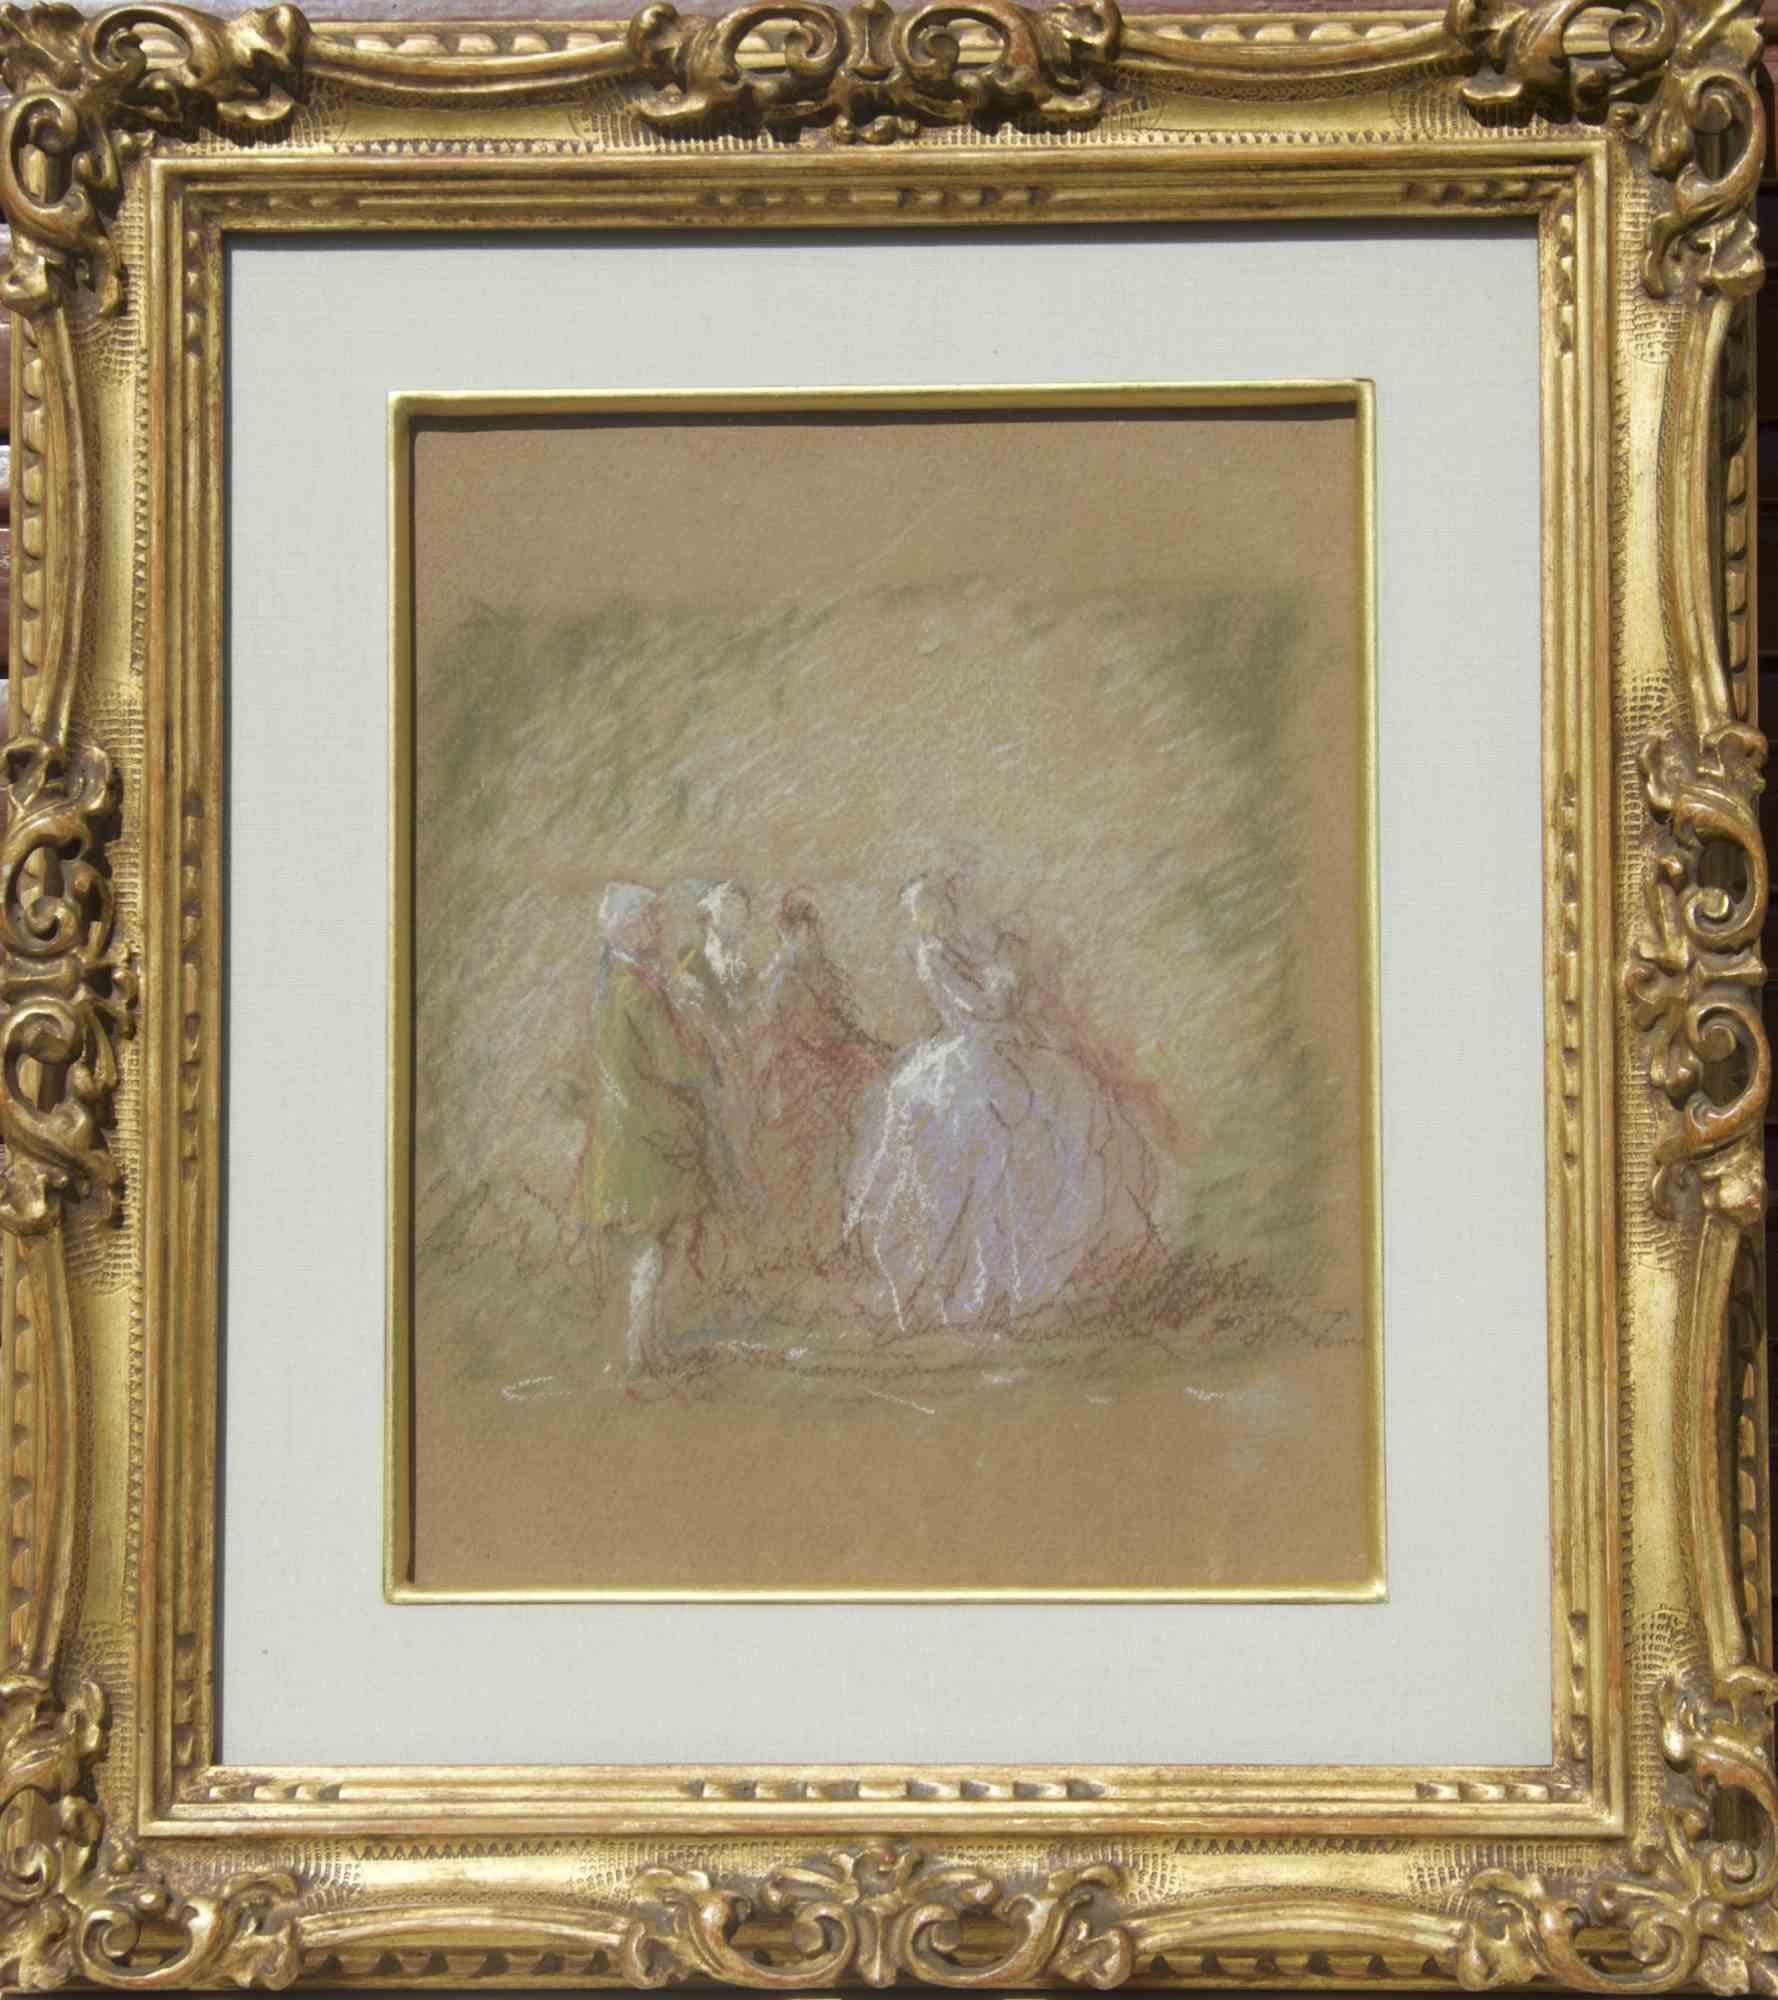 Scene with figures is a beautiful pastel on cardboard realized at the end of the 19th century and attributed to the Italian artist Gaetano Previati.

The piece is in good condition. Frame included.